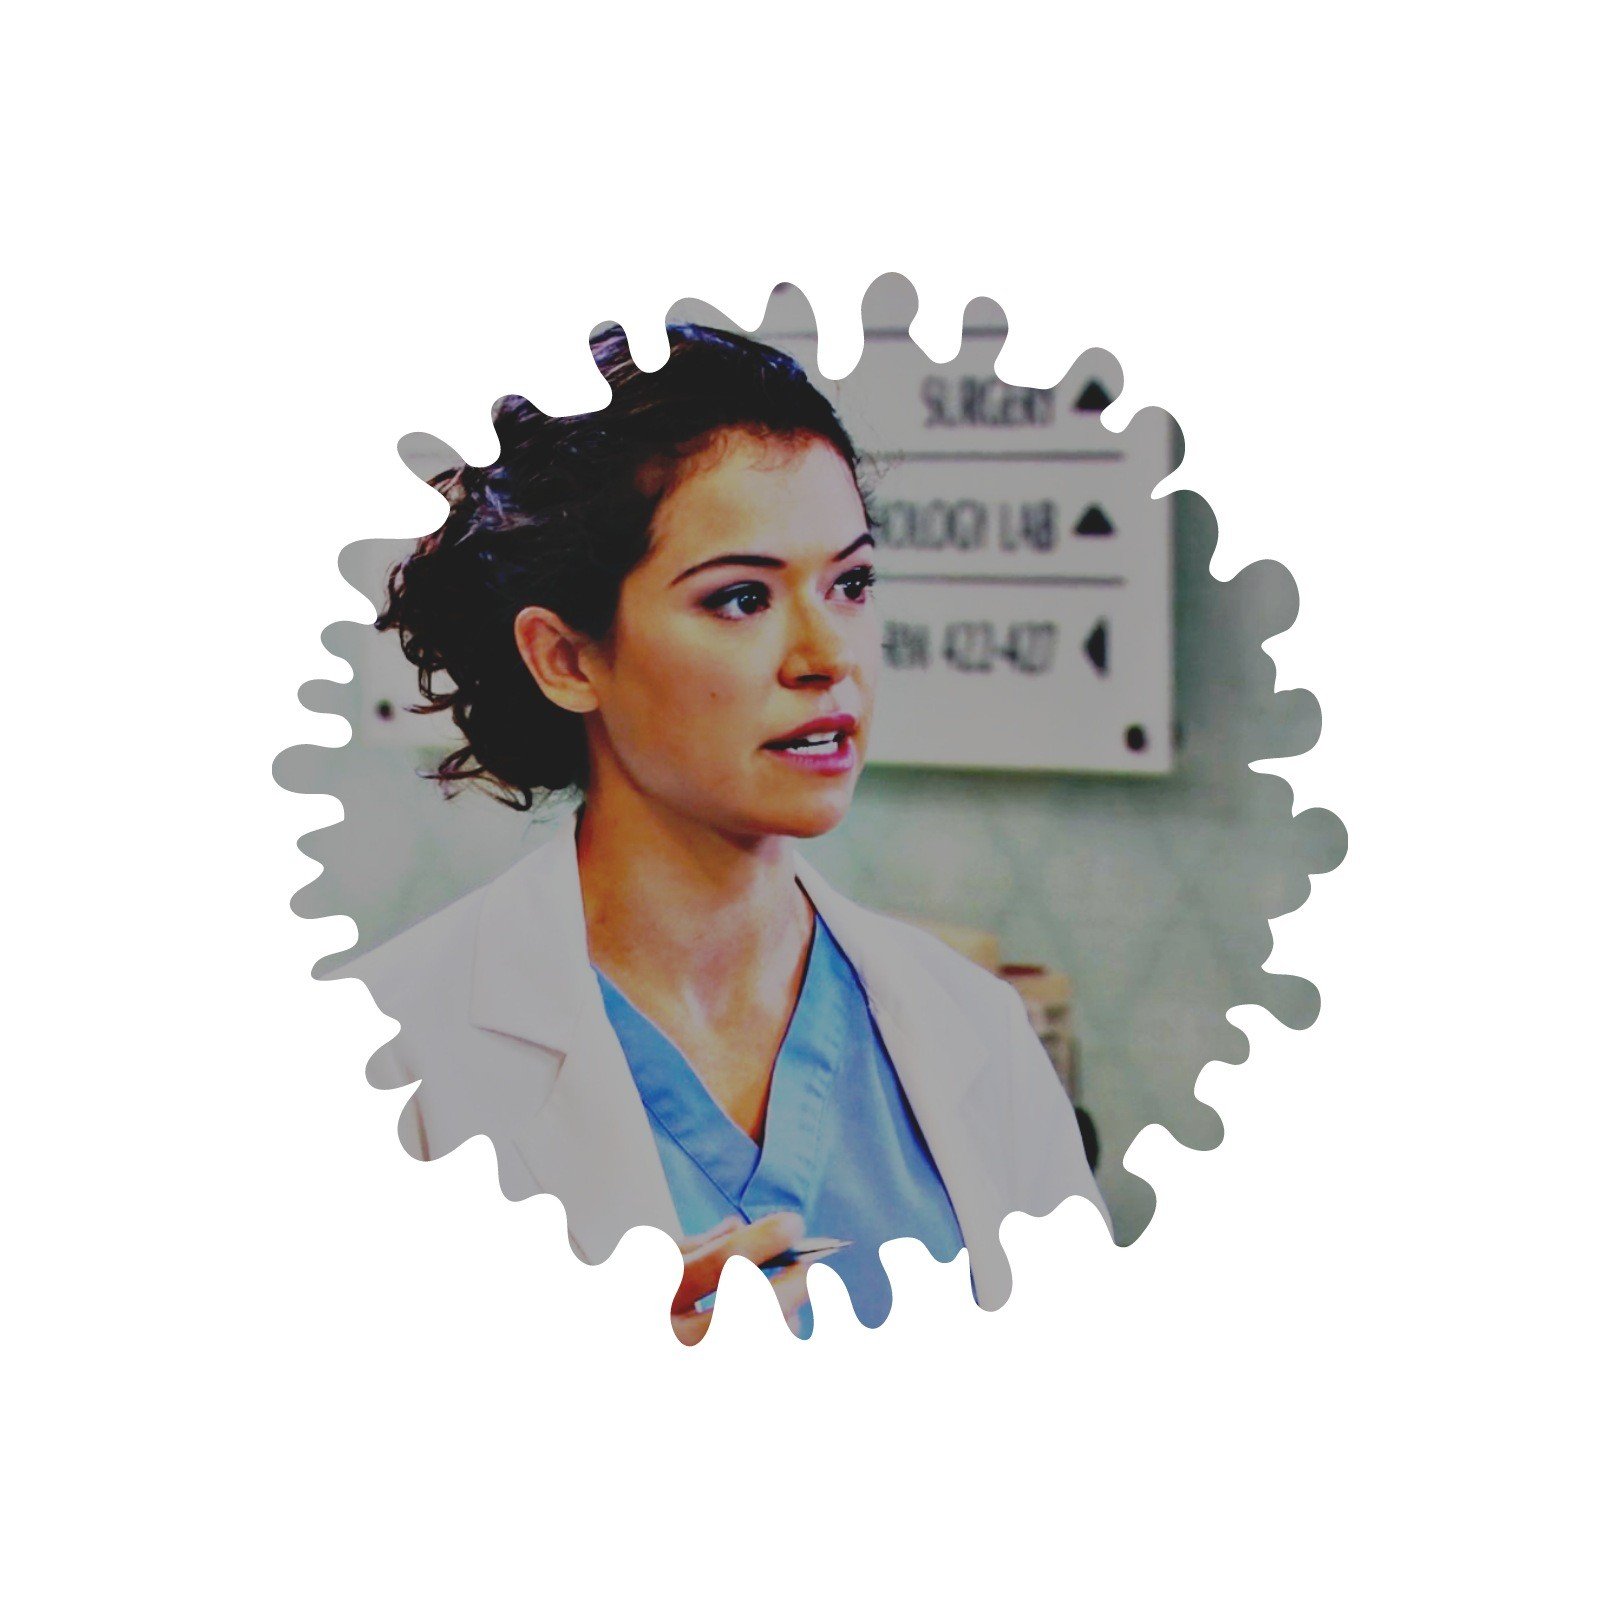 ⠀⠀⠀

⠀⠀⠀𝐶𝐿𝑂𝑁𝐸⠀:⠀⠀⠀𝐏𝐑𝐎𝐉𝐄𝐂𝐓  𝐋𝐄𝐃𝐀⠀:⠀───⠀handler  is  dr.  thomas  leopold⠀;⠀military  doctor.  ⠀⠀〝⠀───⠀you  are  a  weapon，⠀﹠.⠀weapons  do  not  weep.⠀〞
⠀⠀⠀